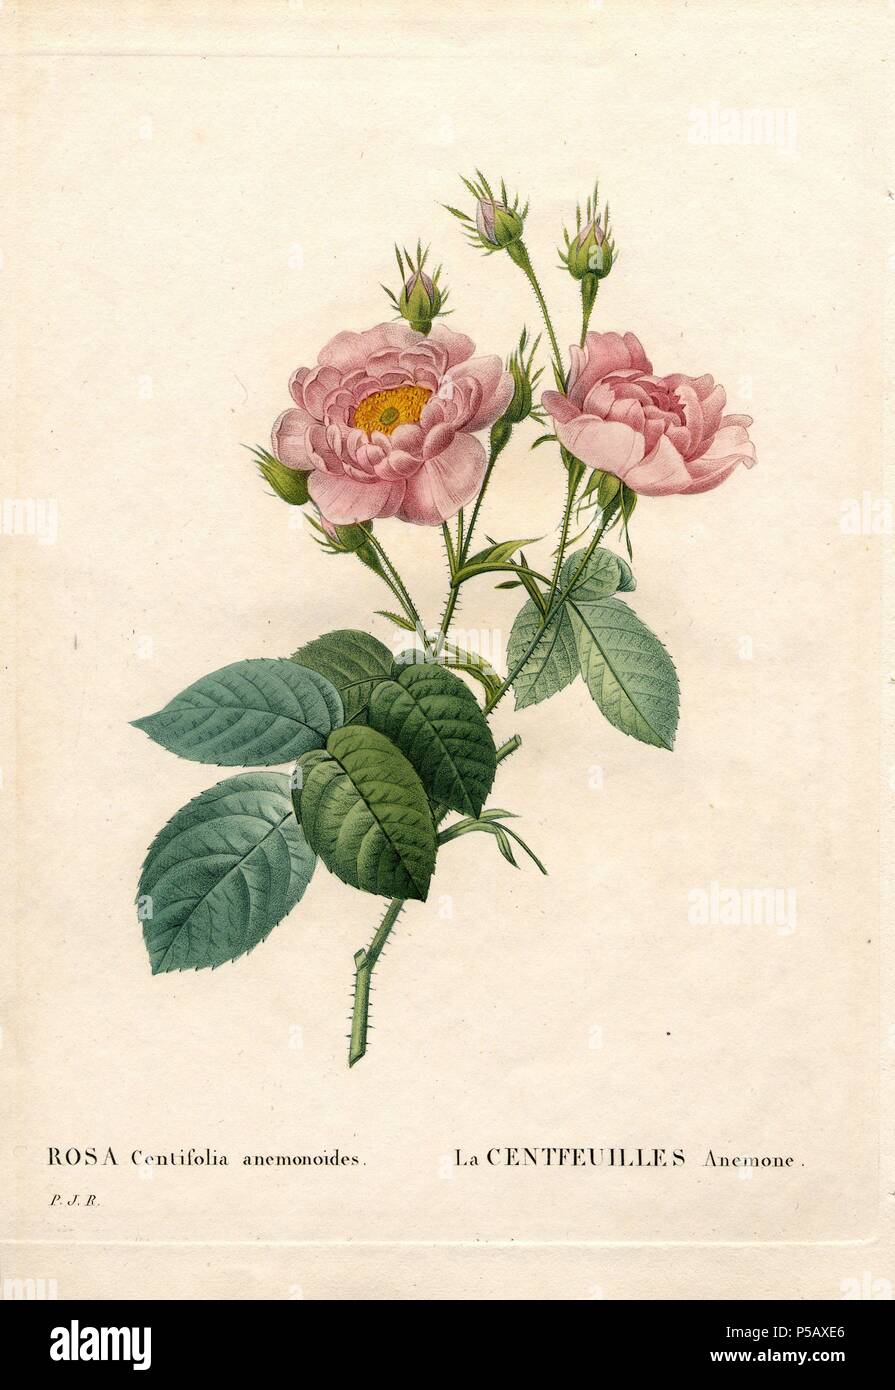 Hundred-Petalled Anemone rose, Rosa centifolia variety, La Centfeuilles Anémone. Handcoloured stipple copperplate engraving from Pierre Joseph Redoute's 'Les Roses,' Paris, 1828. Redoute was botanical artist to Marie Antoinette and Empress Josephine. He painted over 170 watercolours of roses from the gardens of Malmaison. Stock Photo